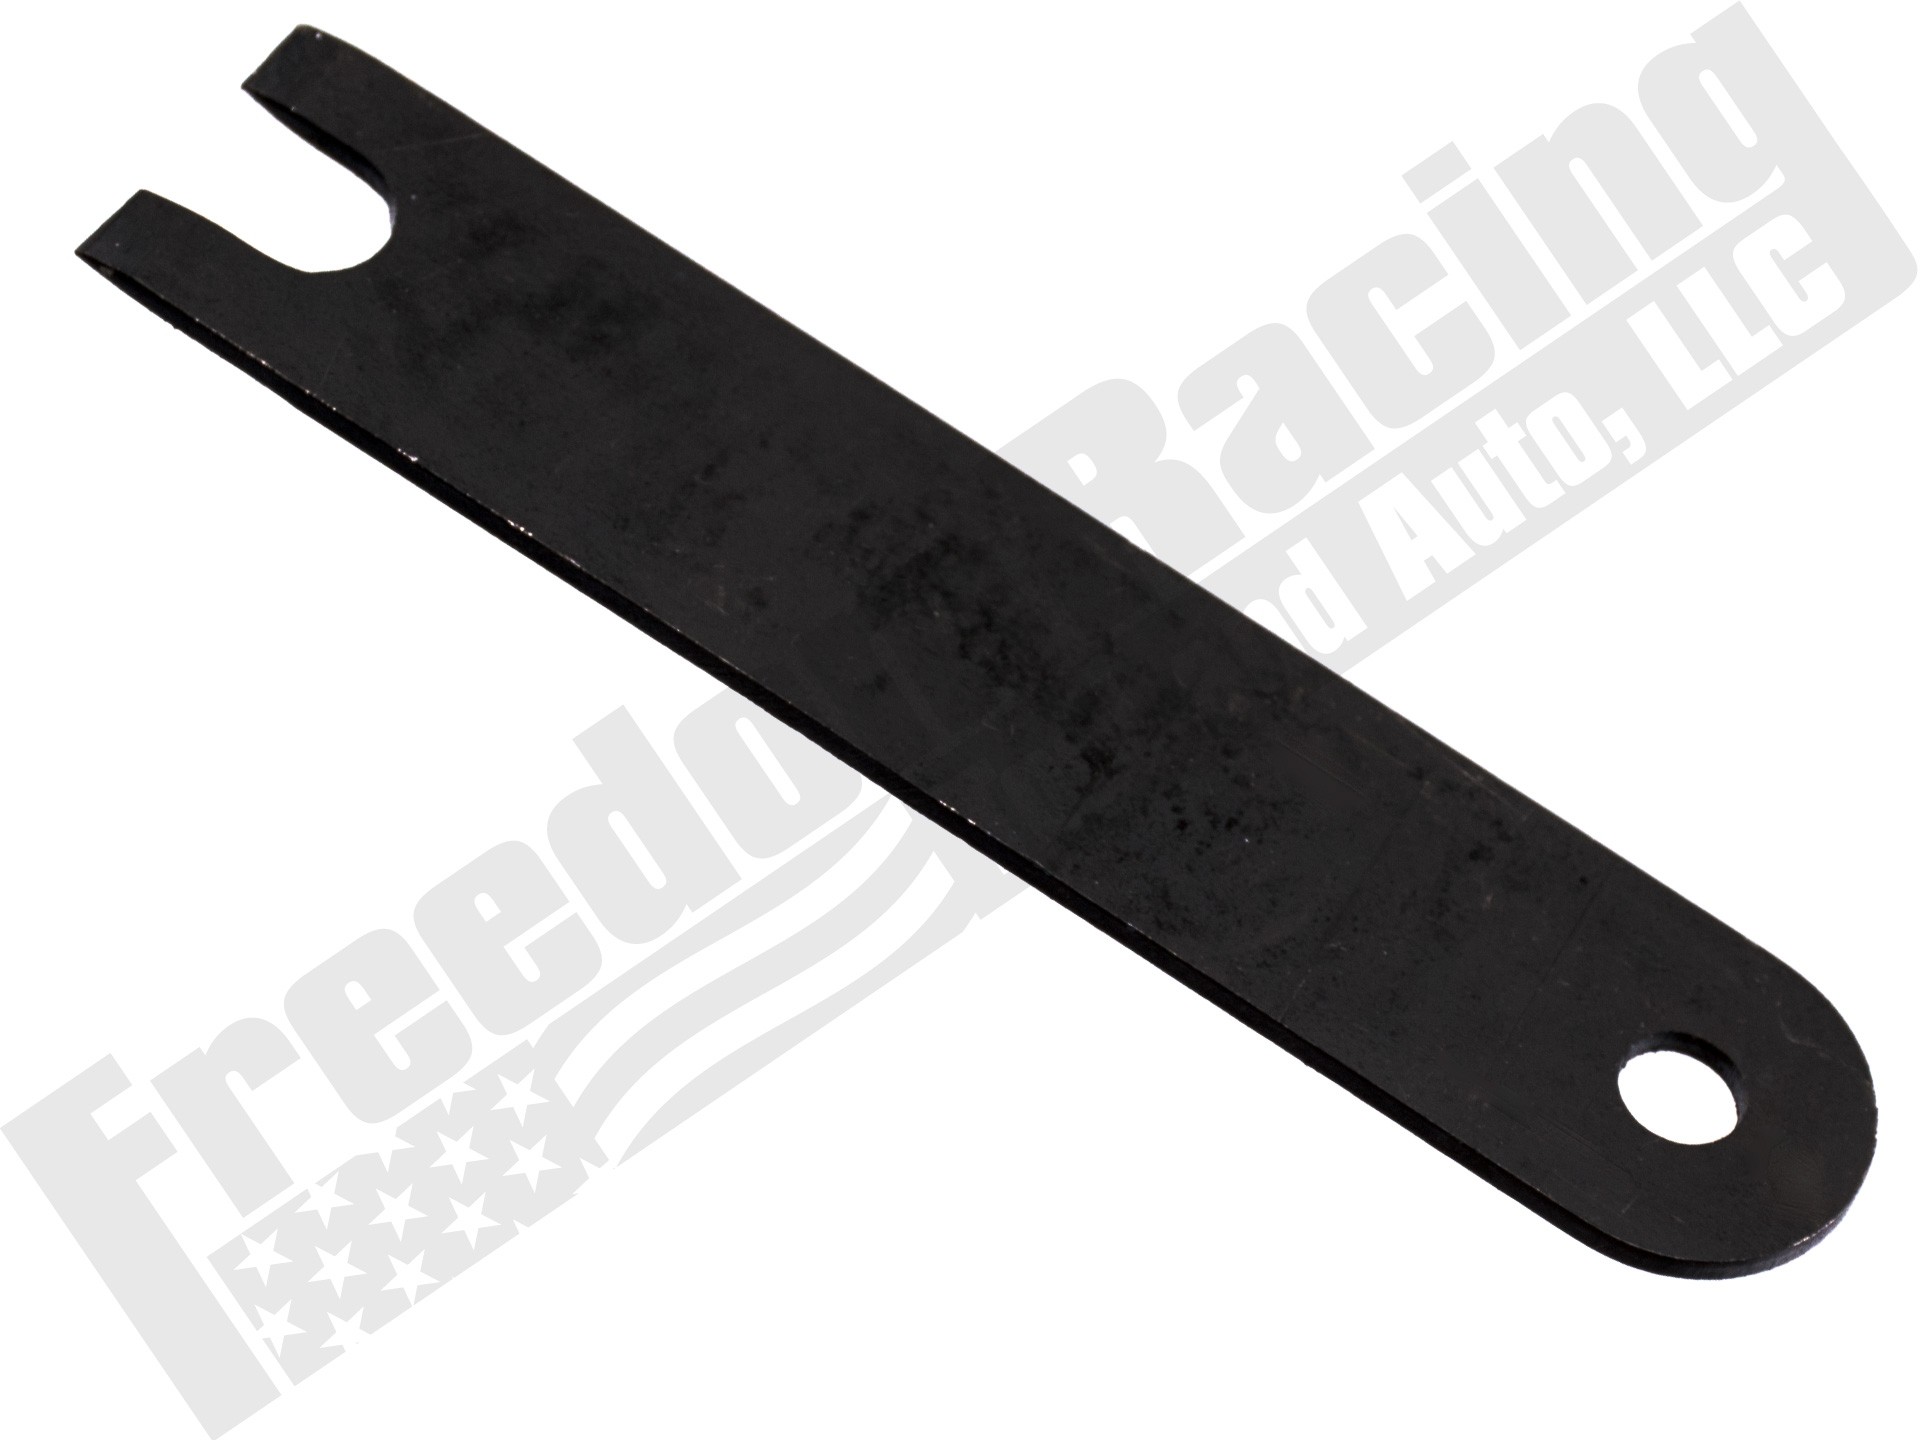 Otc 6595 Ford Oil Line Disconnect Tool 